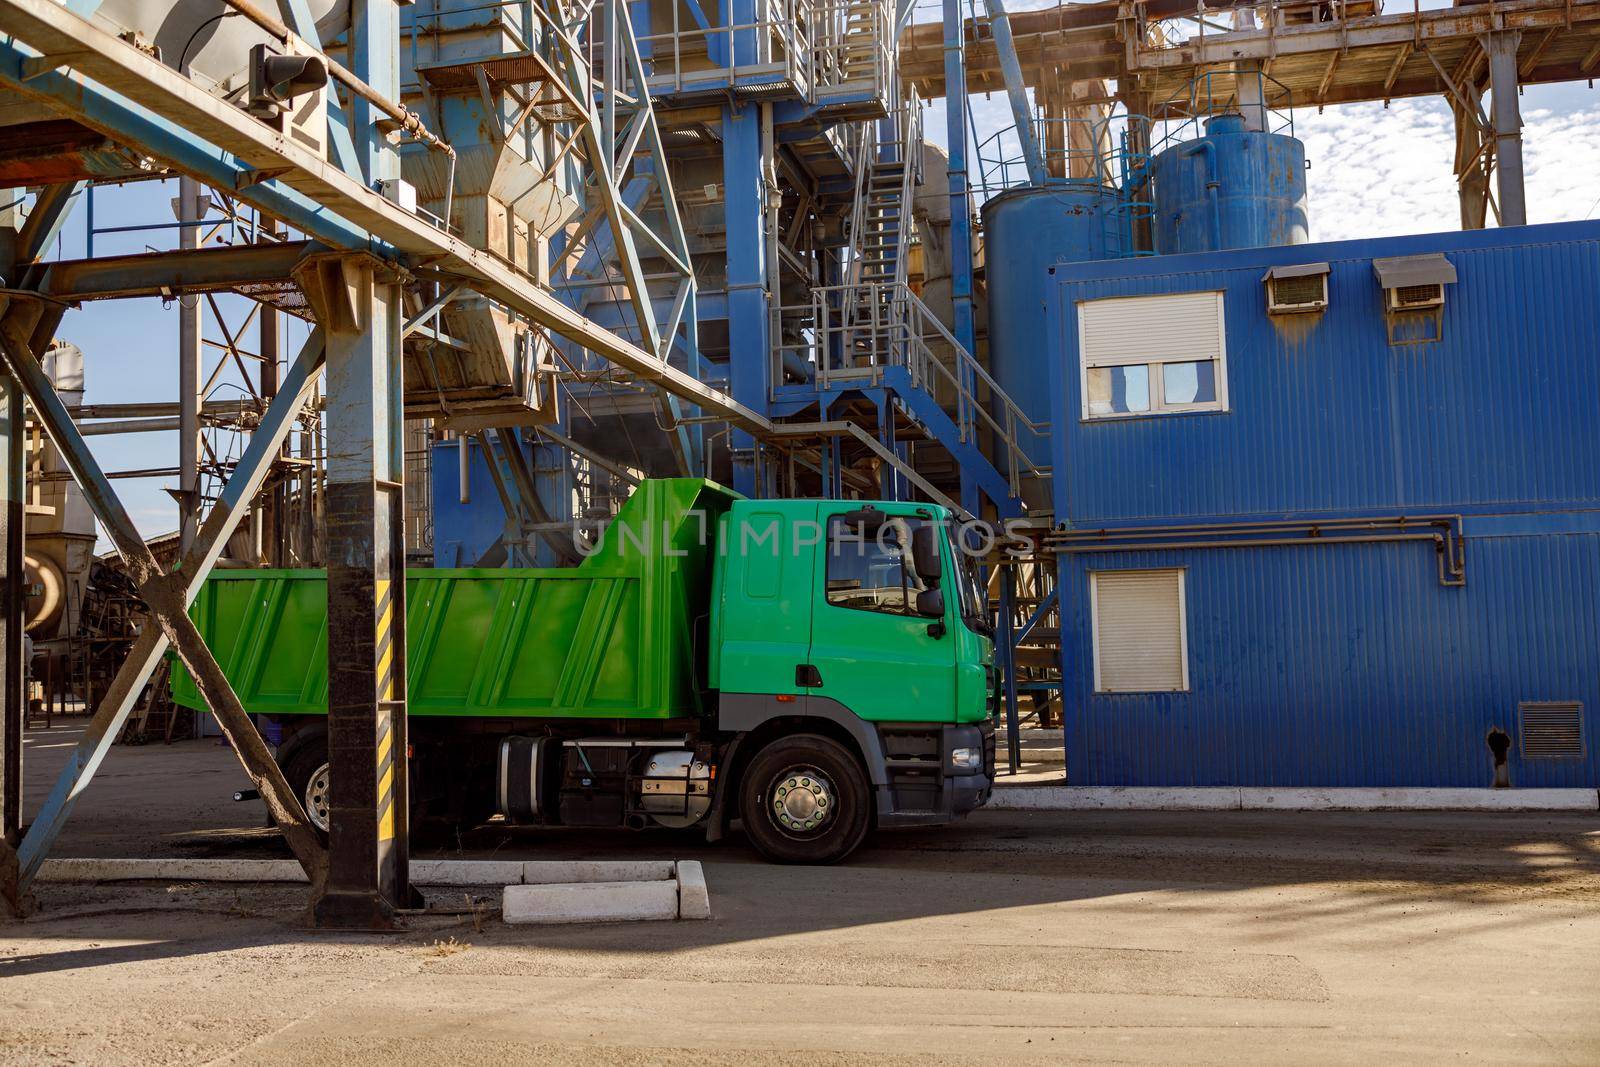 Industrial facilities and truck outdoors at plant by Yaroslav_astakhov